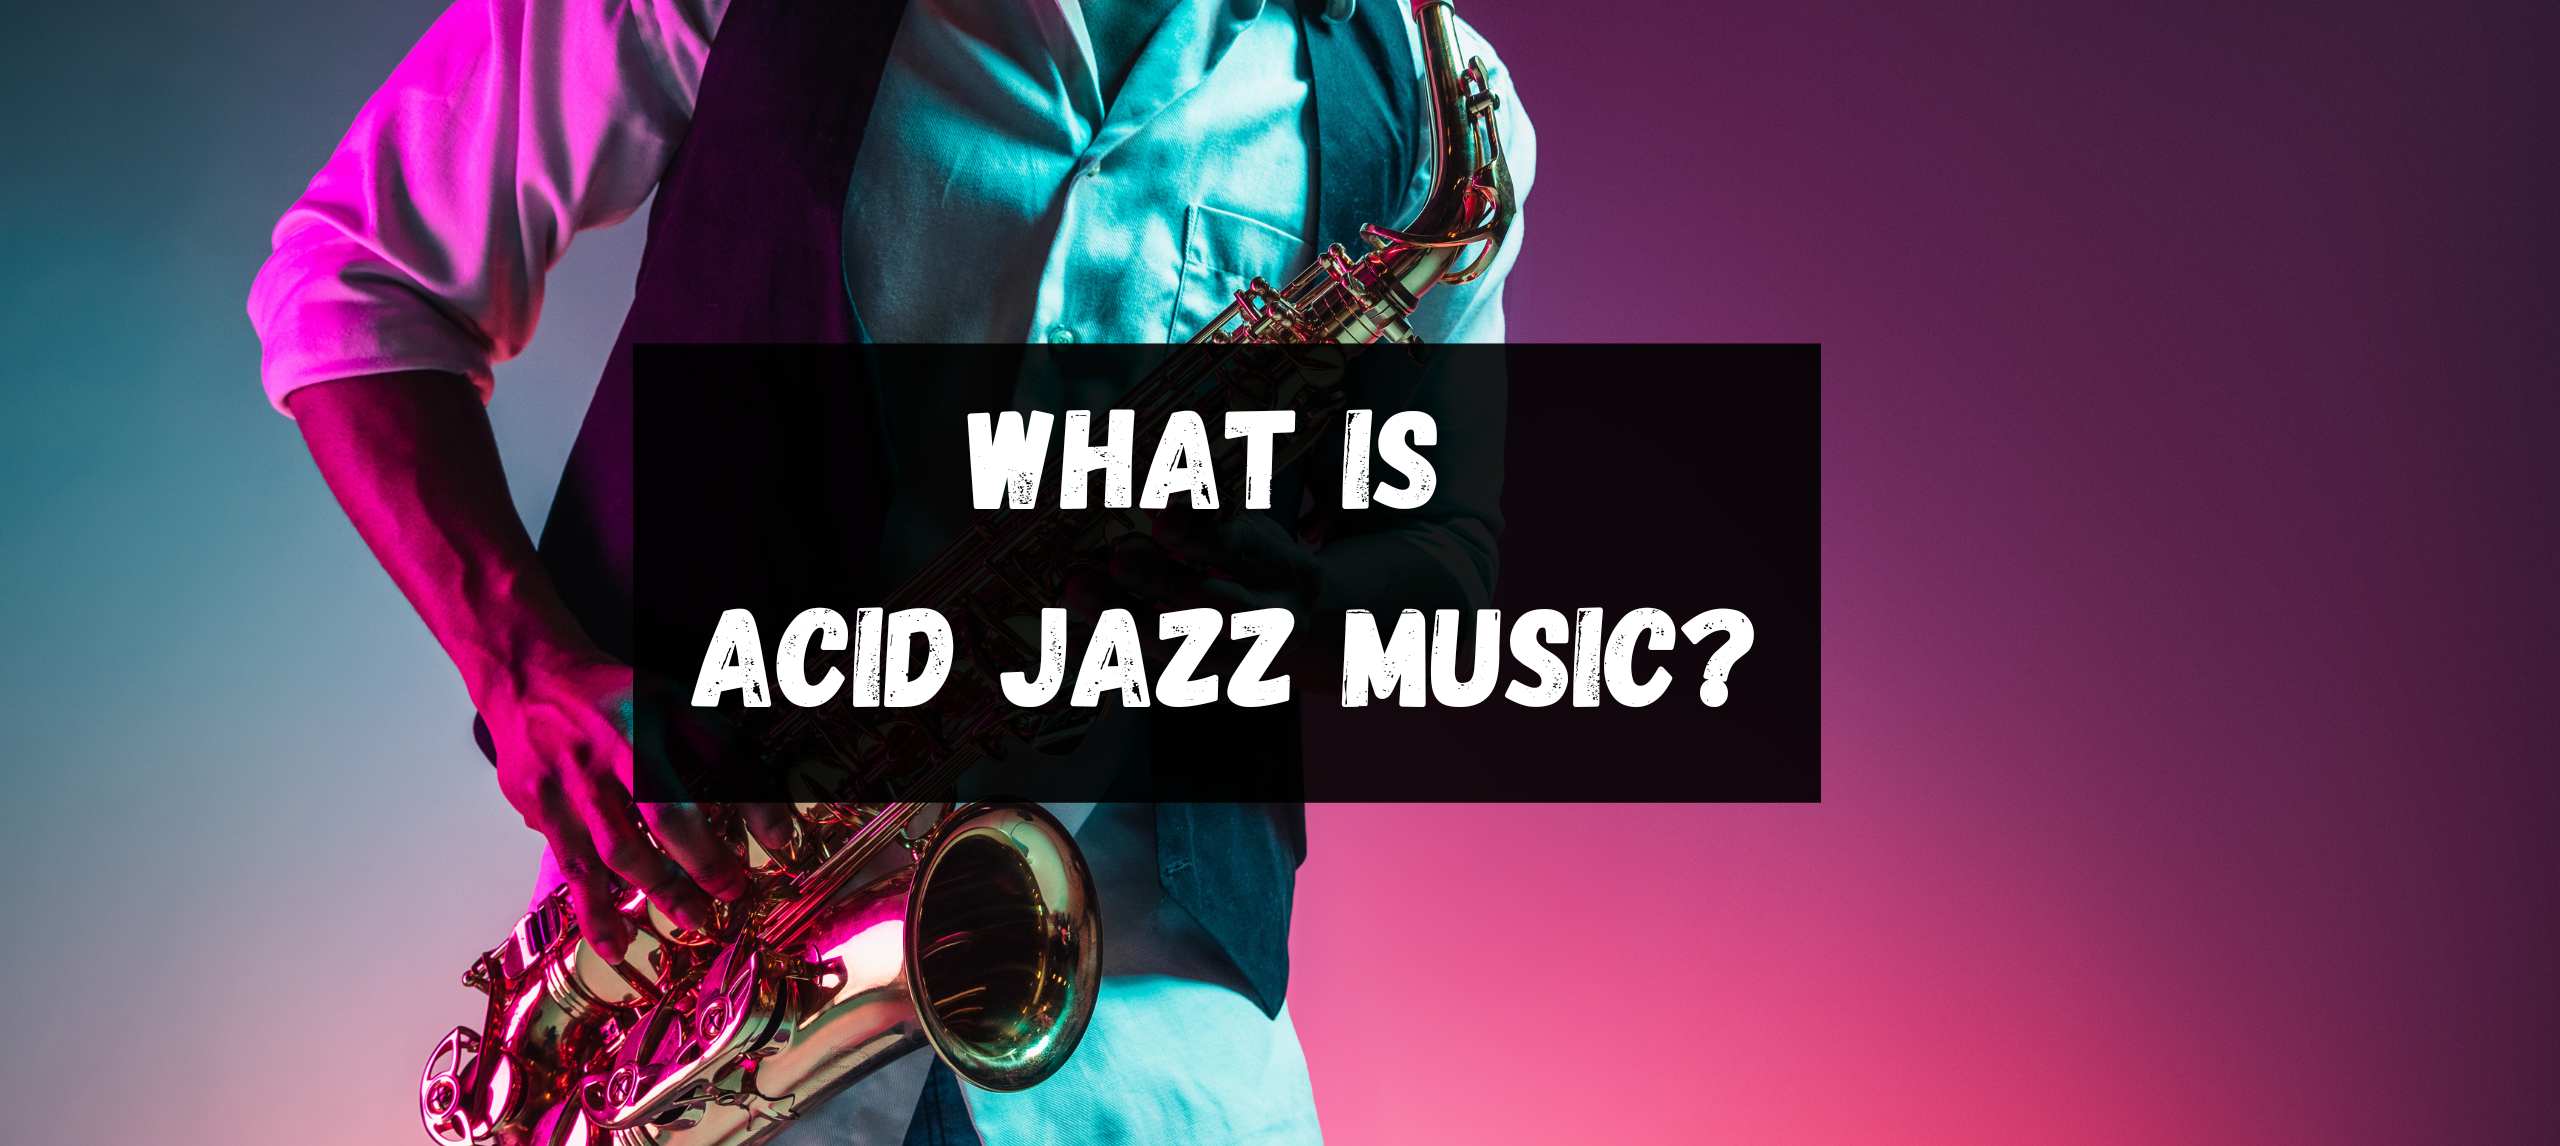 what-is-acid-jazz-music